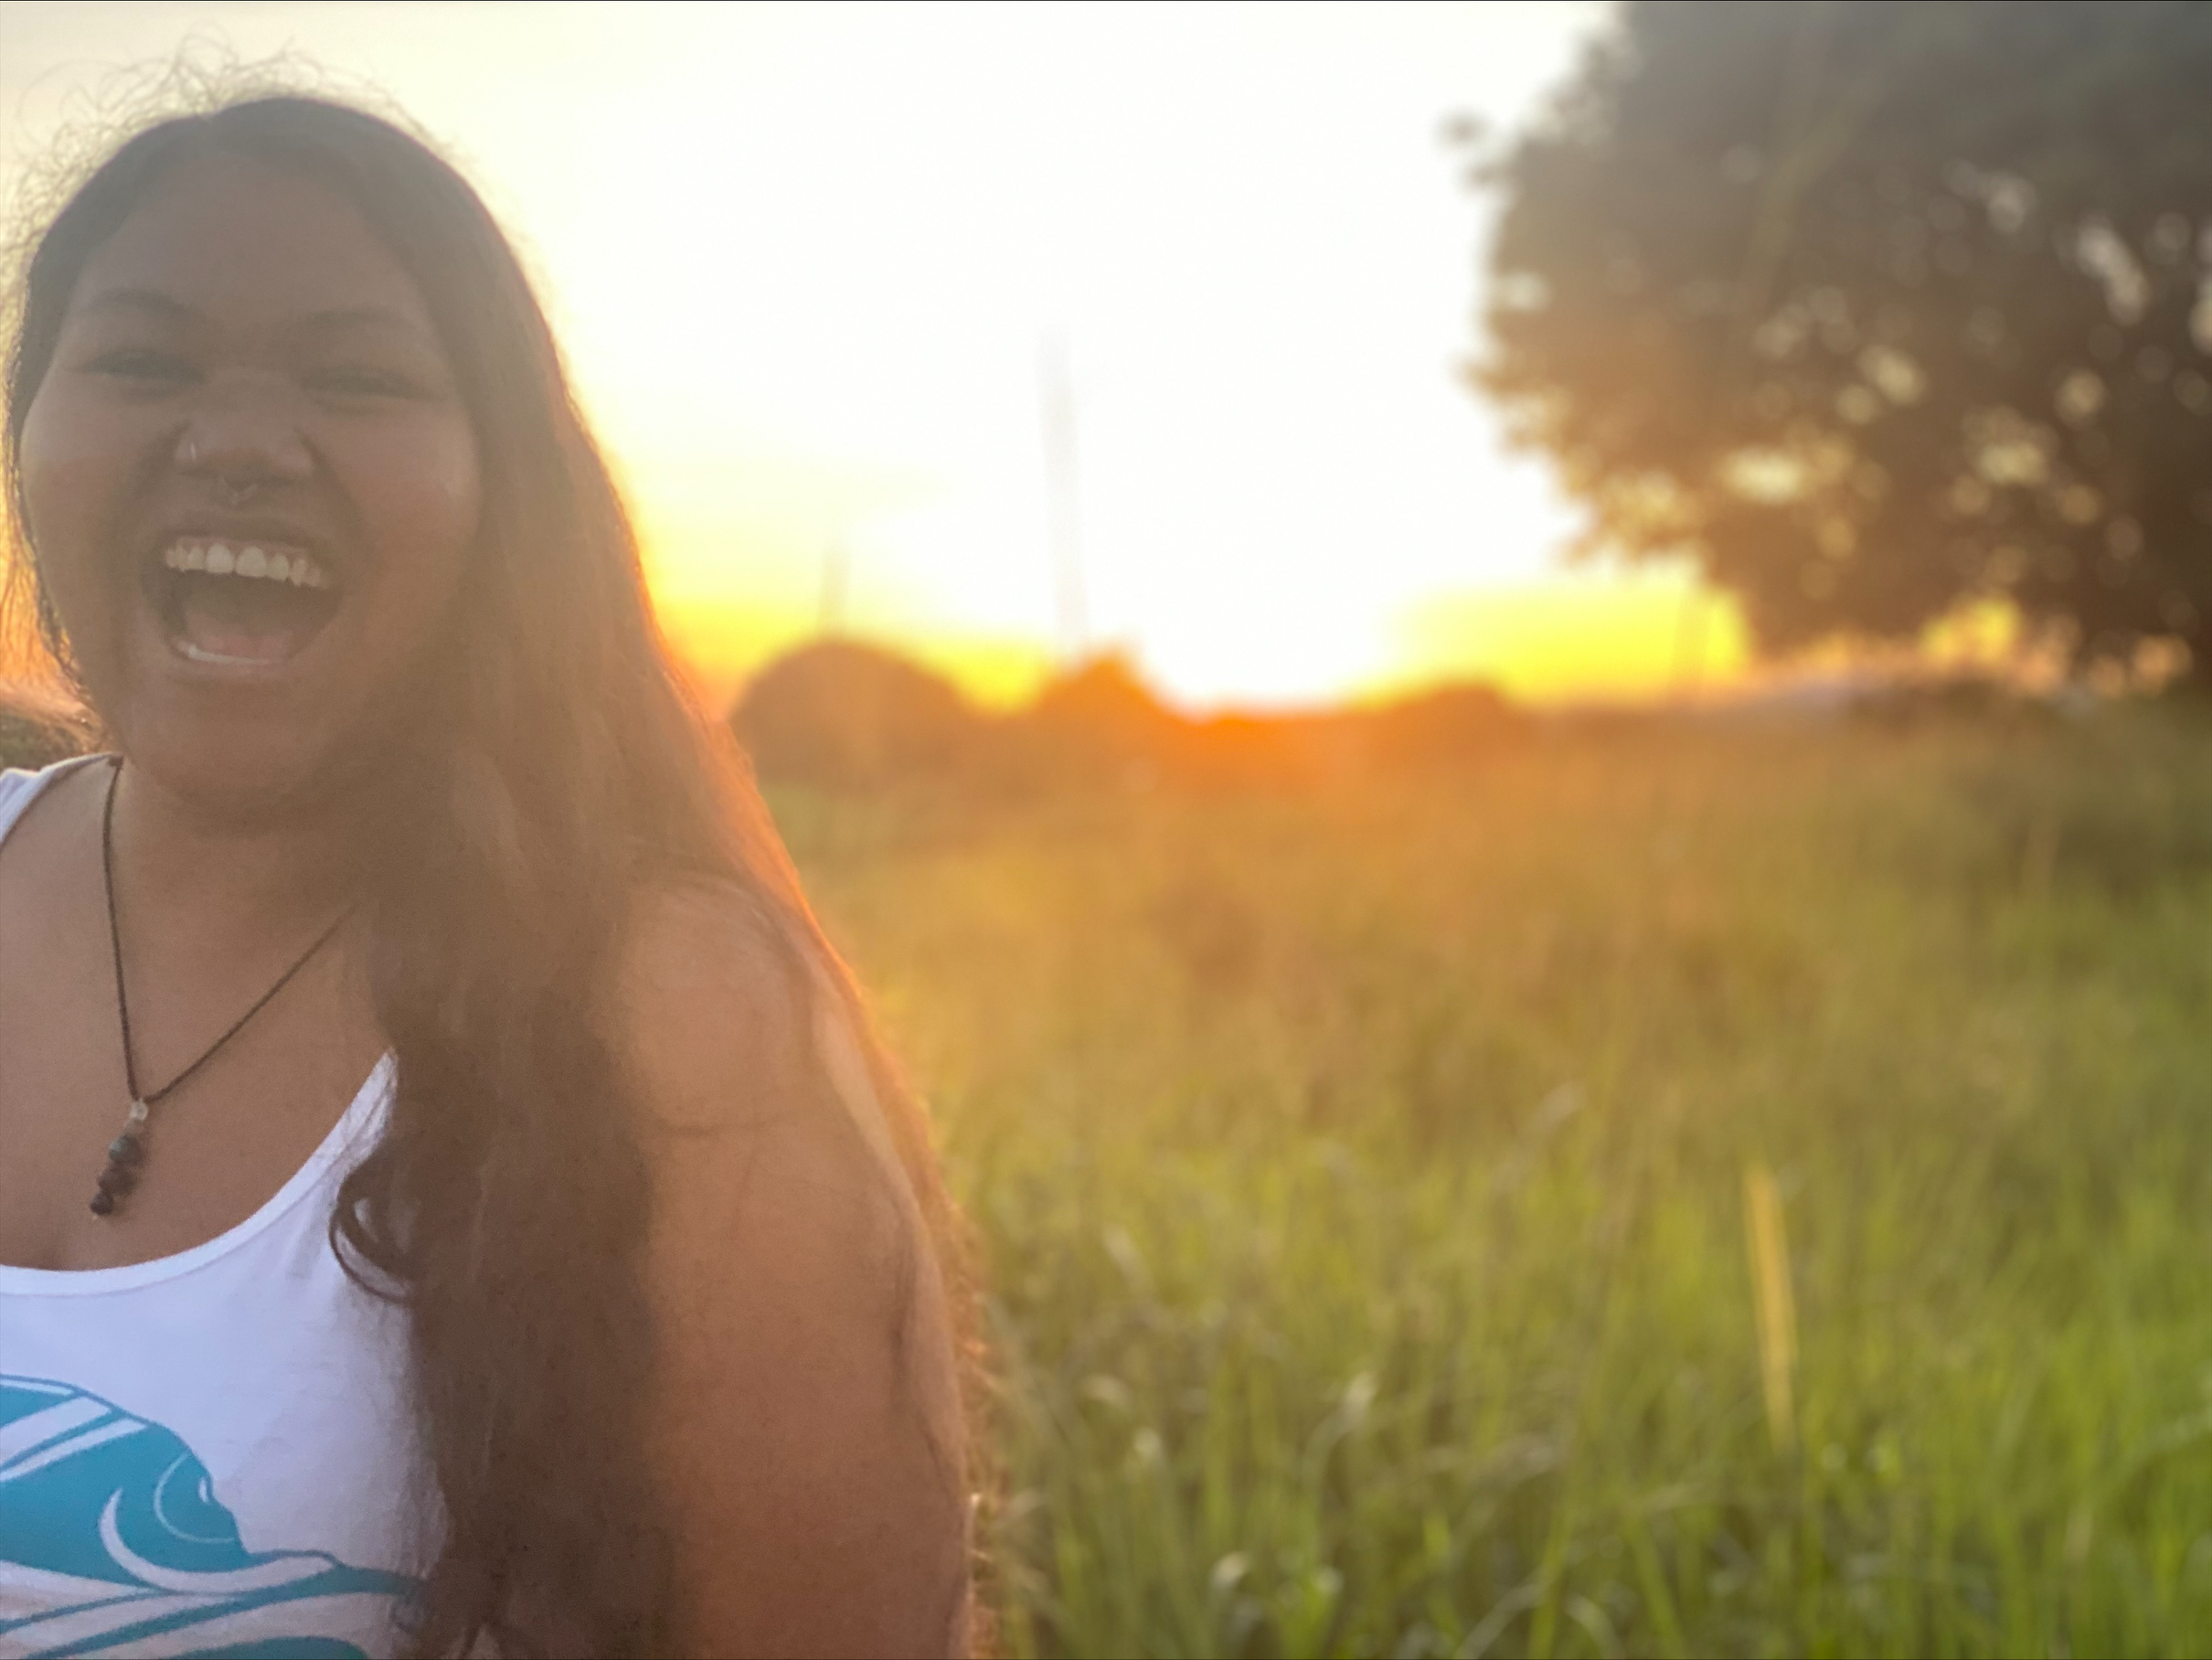 A photograph of a woman laughing in a field with the sun setting in the background